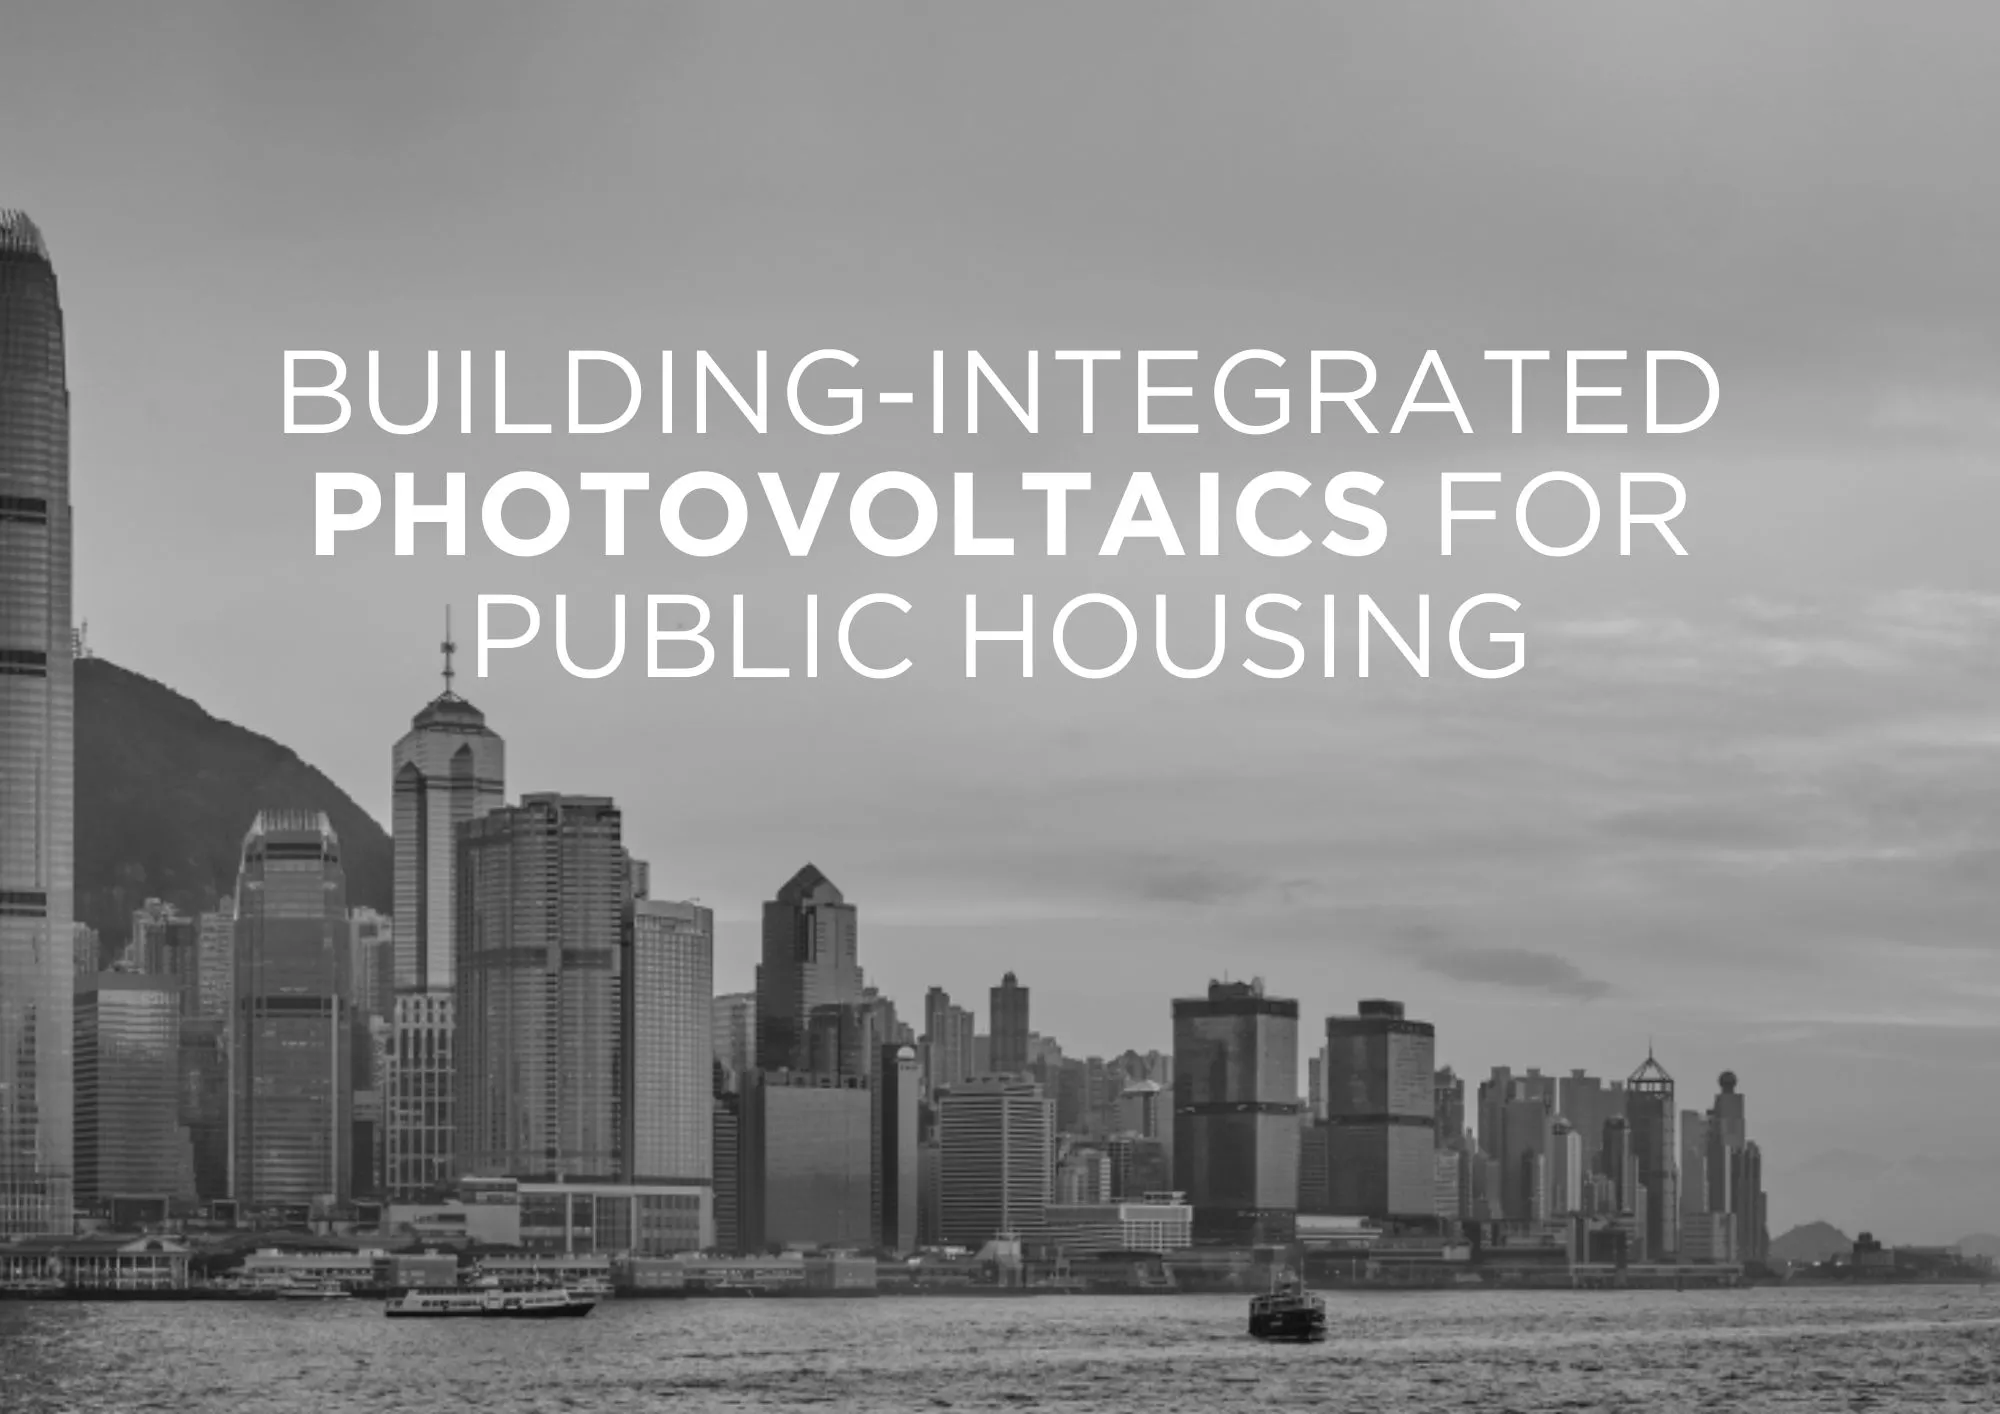 The Future of Clean Energy for Low-carbon MiC Public Housing using Smart Building Integrated Photovoltaic Systems (BIPVs)